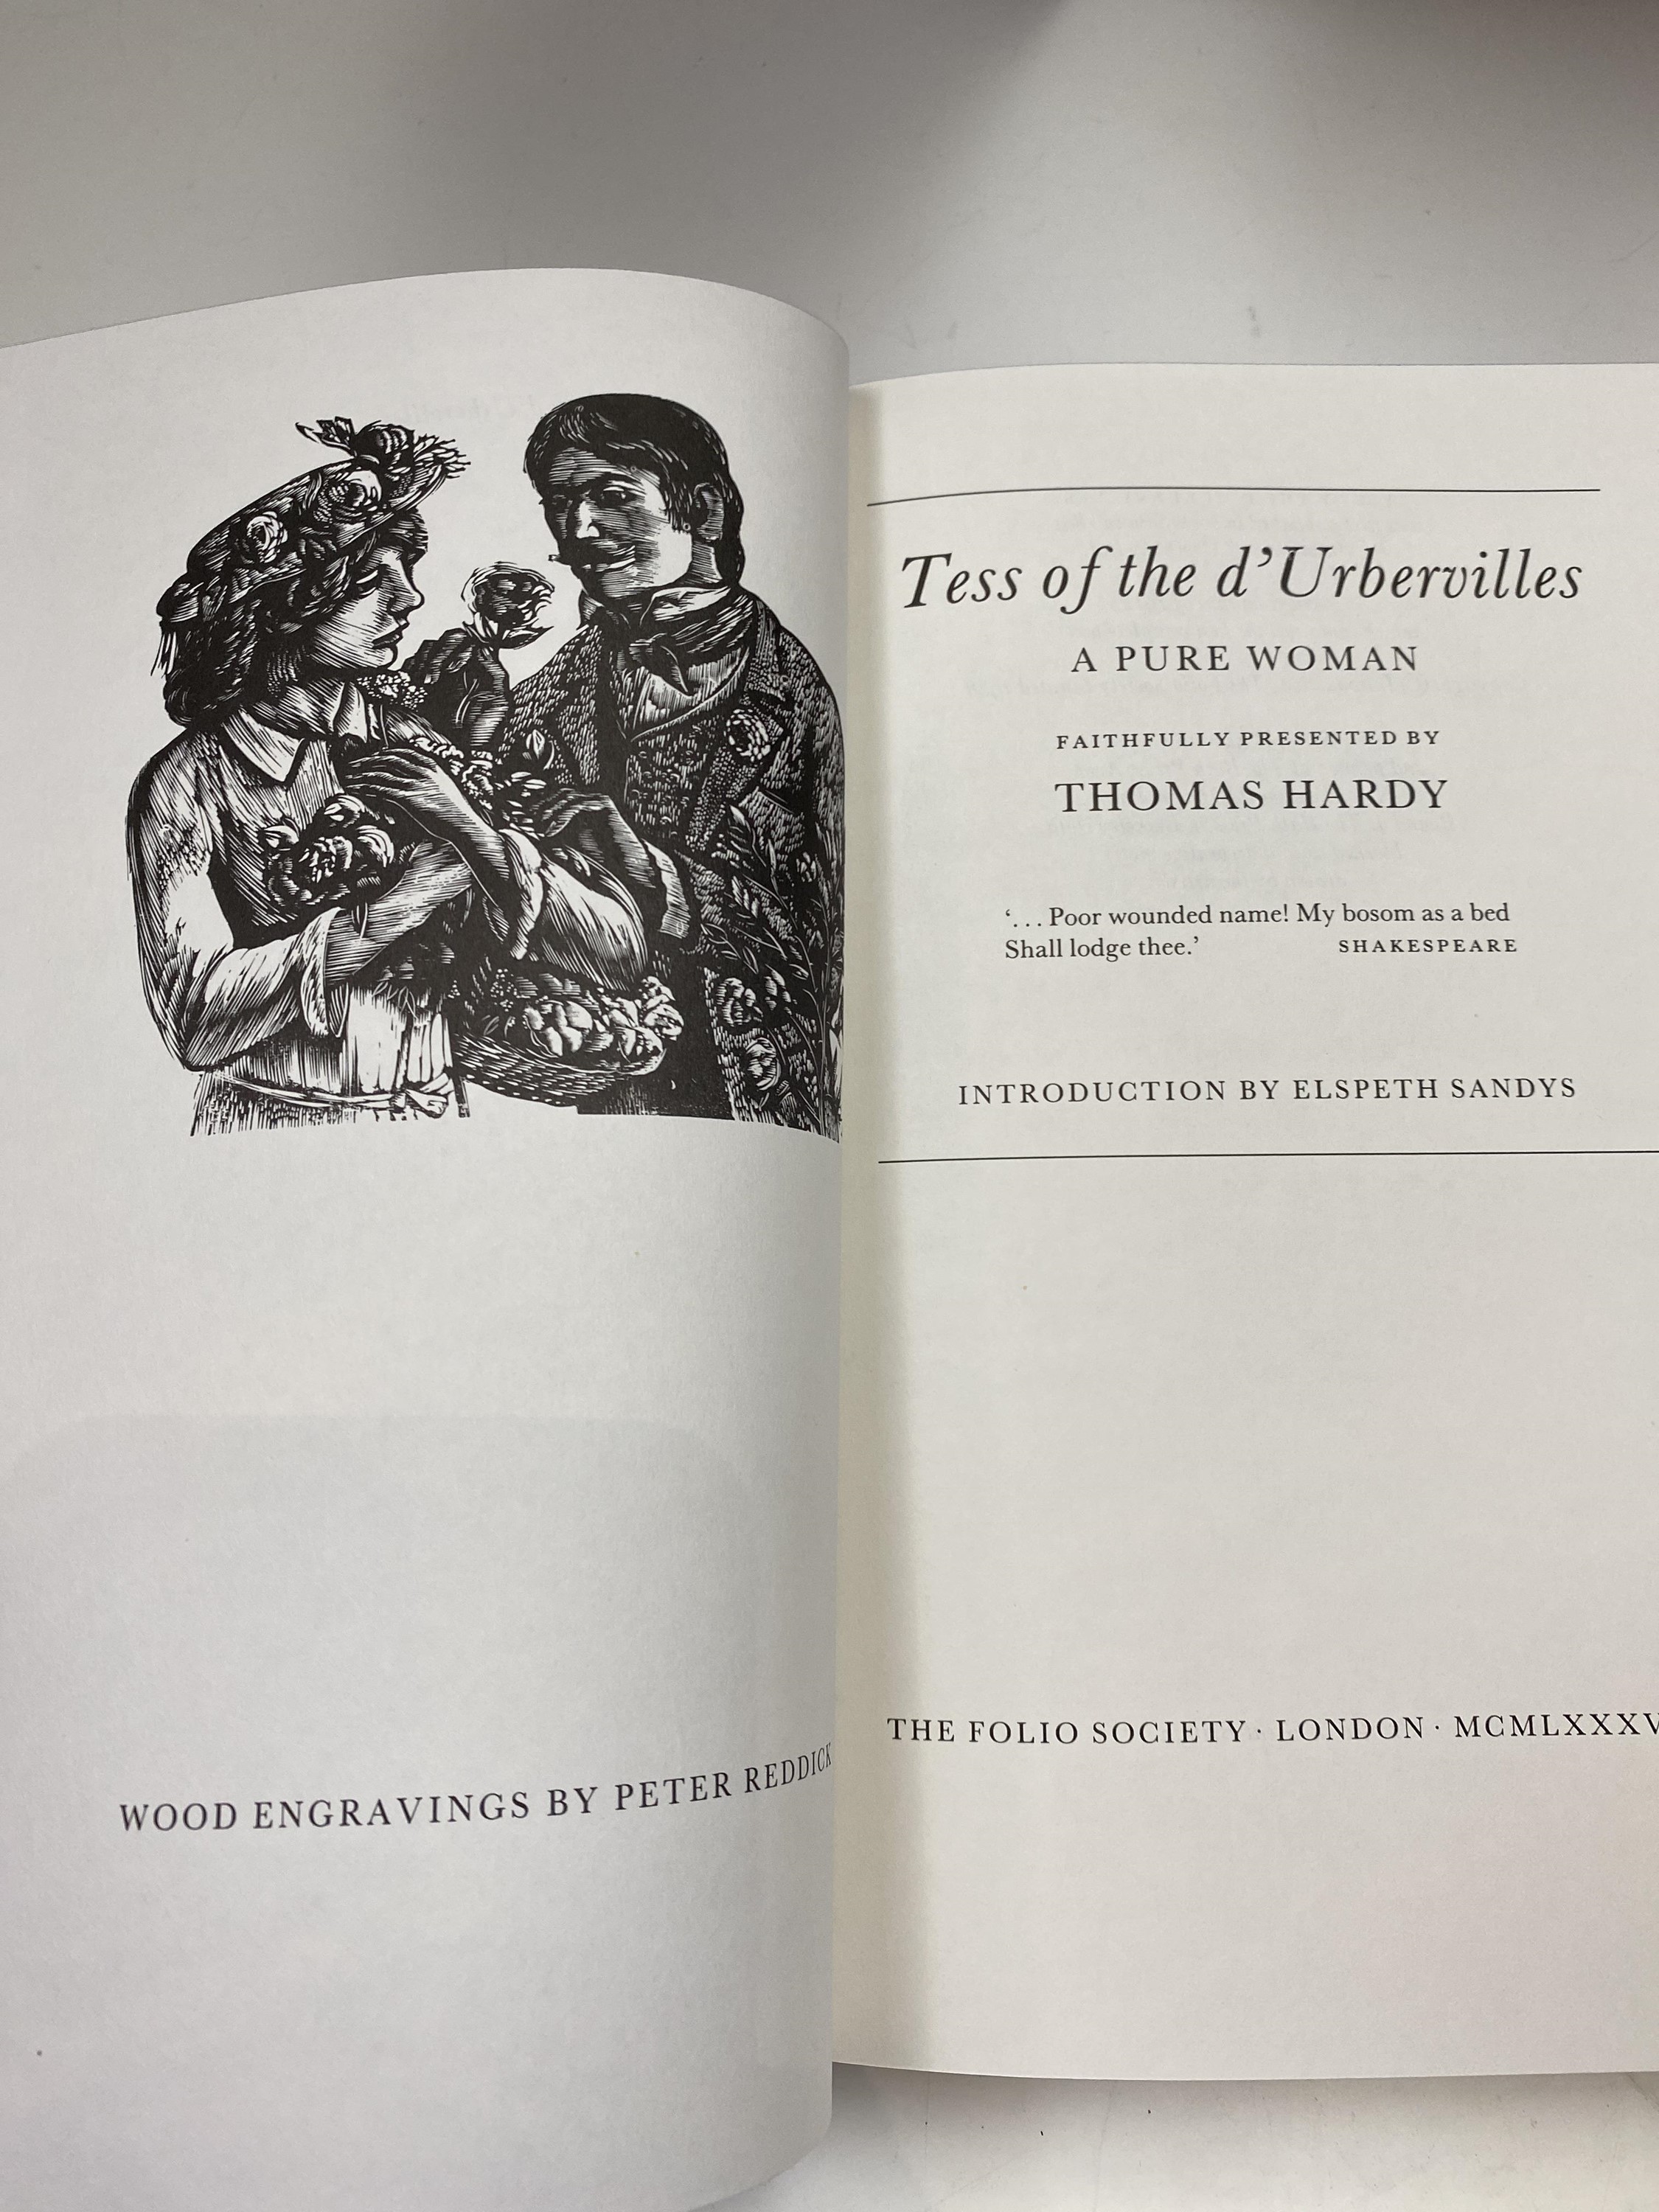 FOLIO SOCIETY. Sixteen volumes of Thomas Hardy including Tess d'Urbervilles, The Woodlanders, and - Image 5 of 5